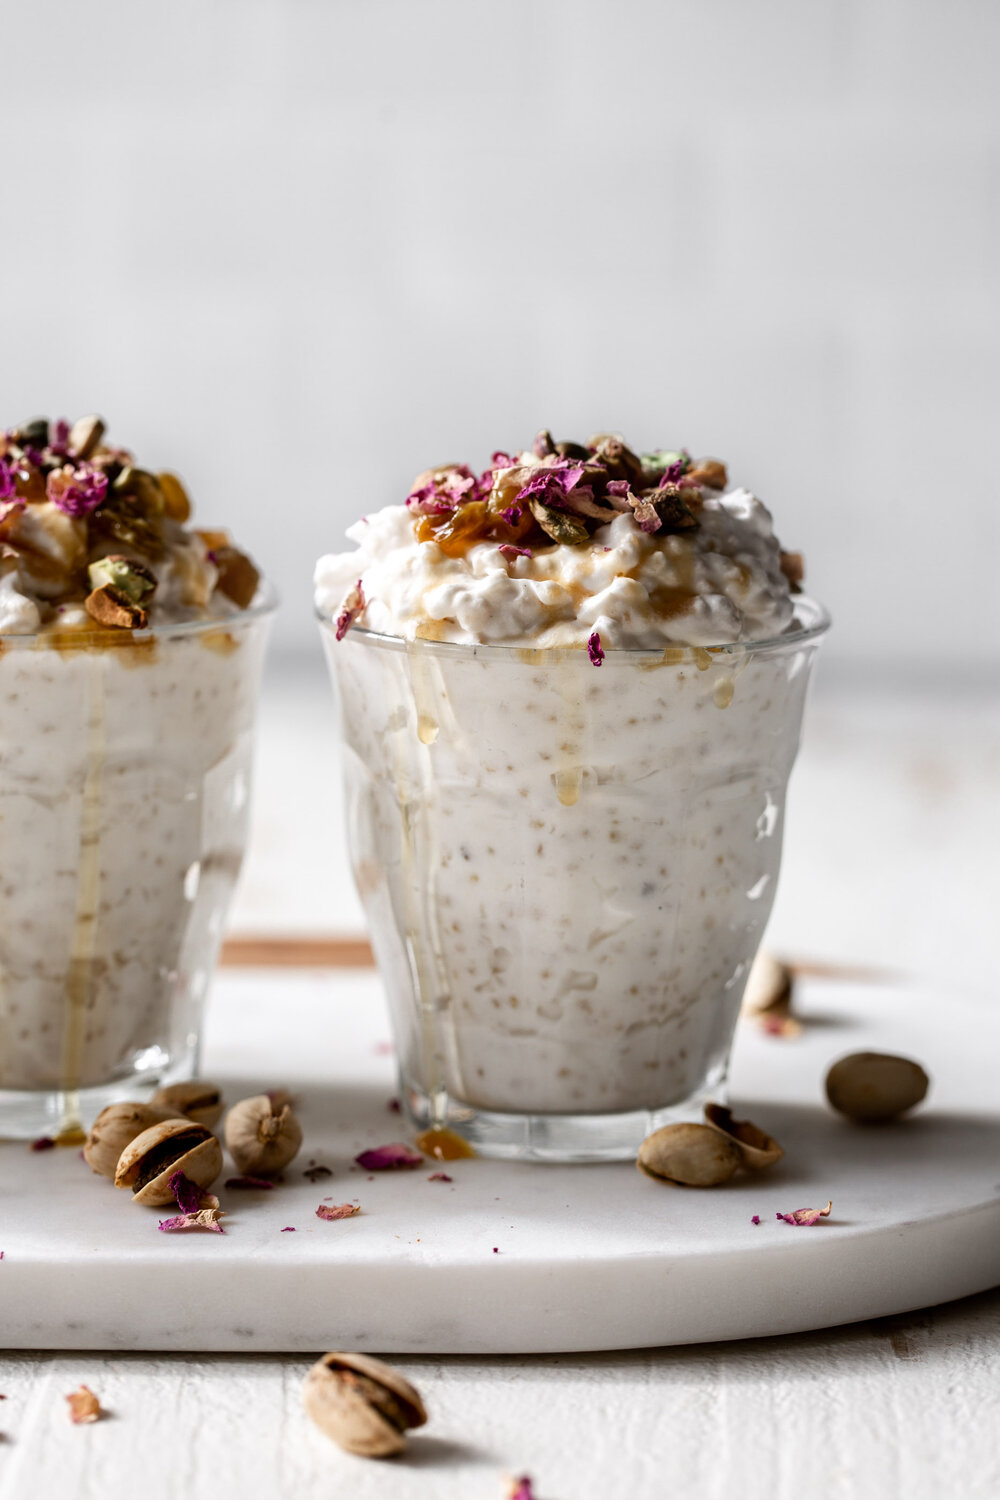 Creamy Millet Pudding with Pistachios & Rum Soaked Raisins in glasses